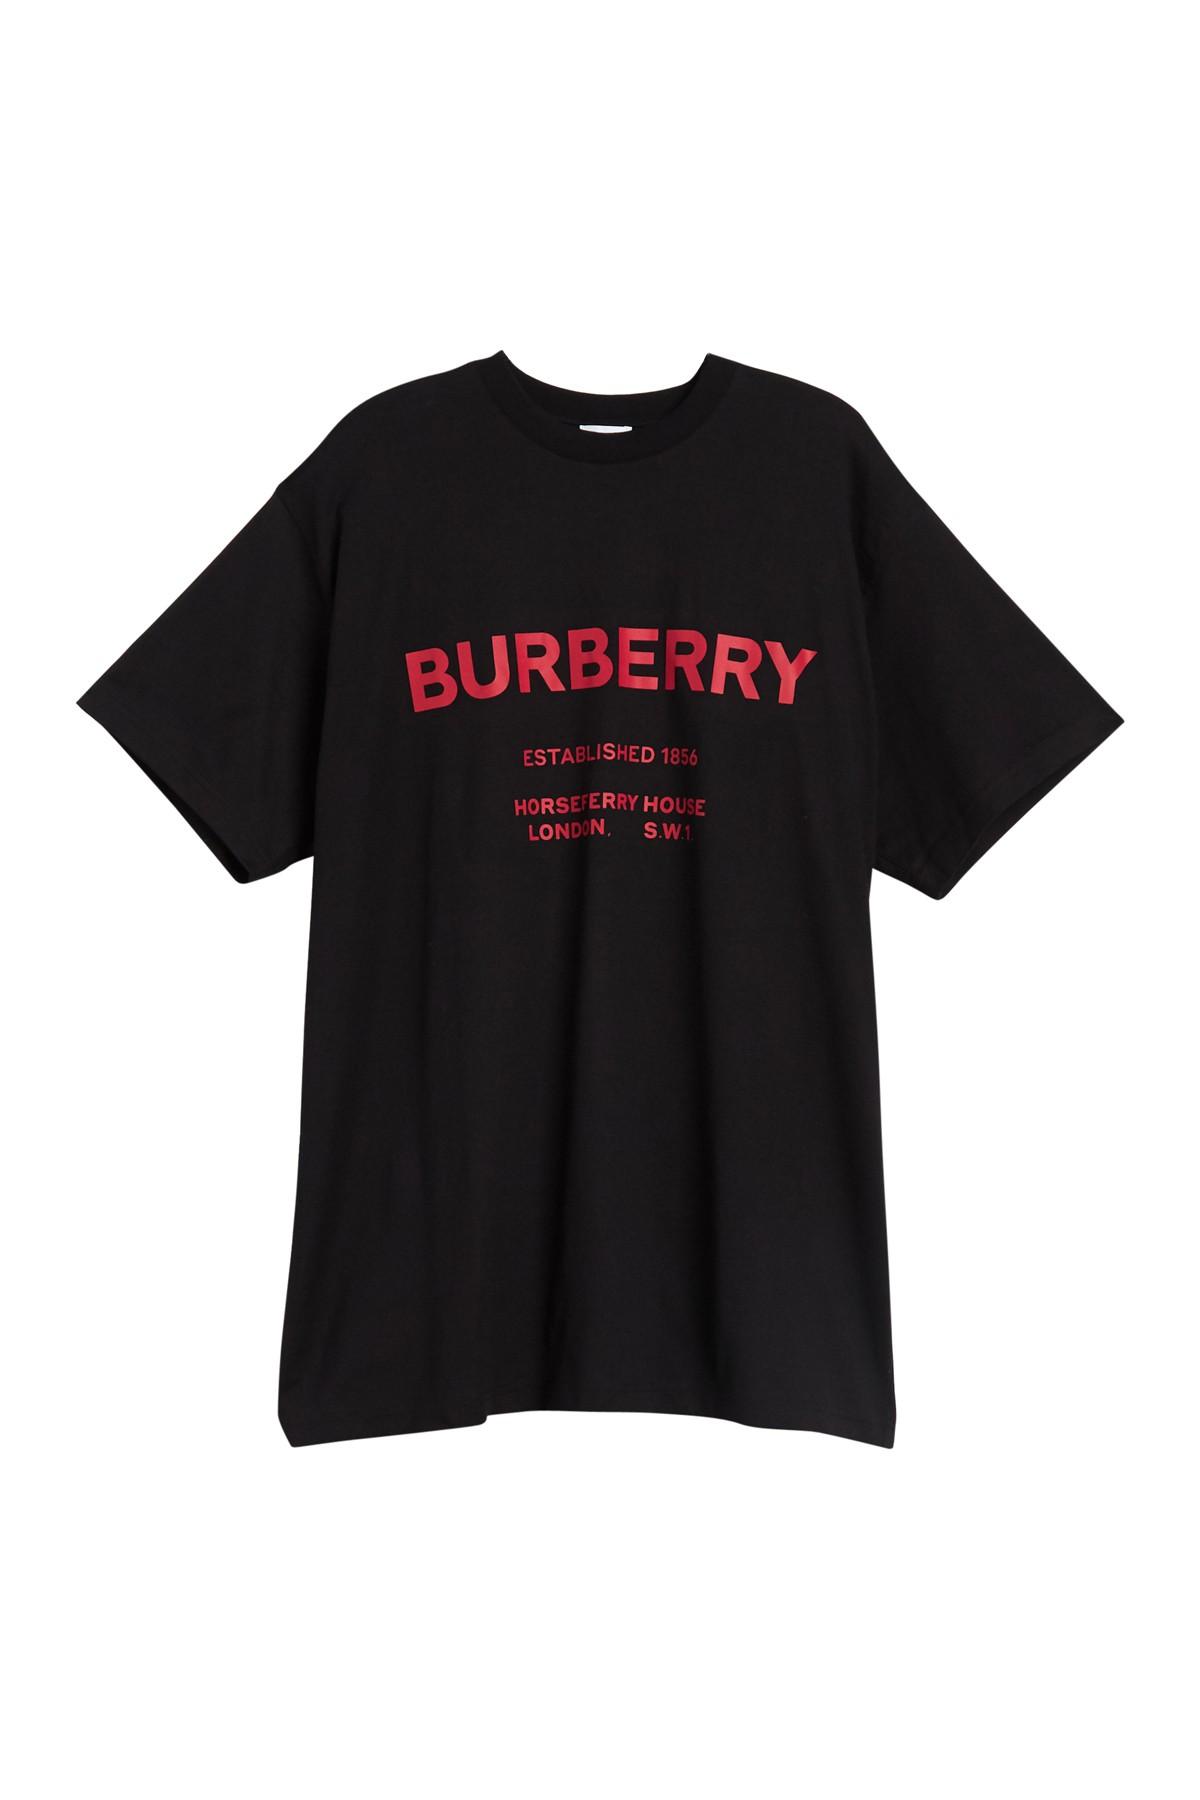 Burberry Horseferry Print Cotton T-shirt in Black for Men - Lyst